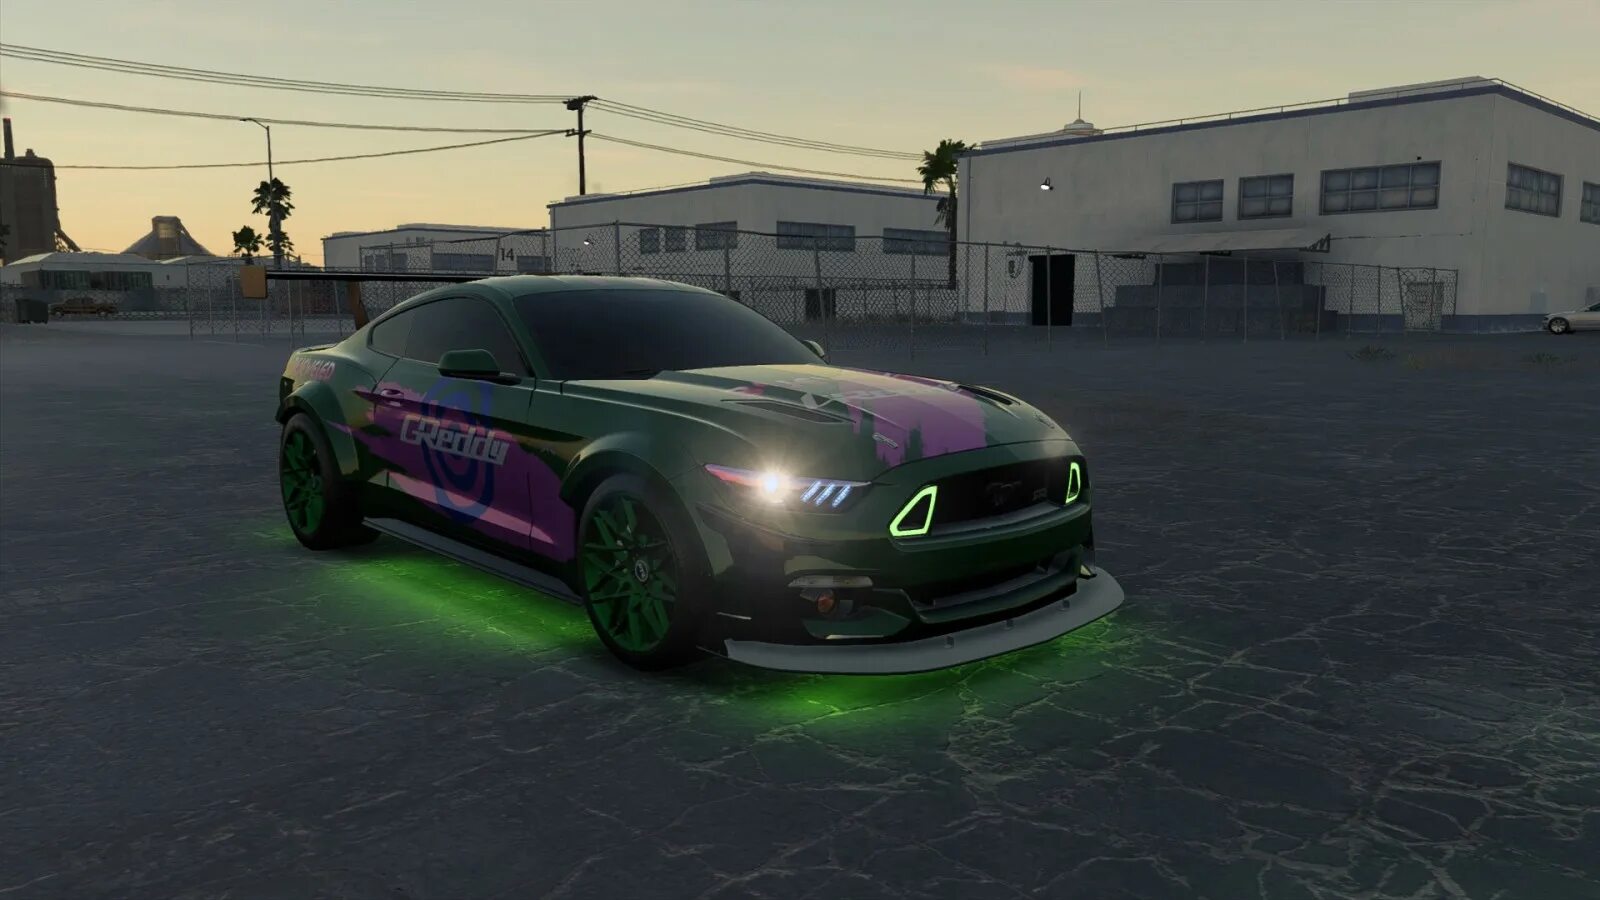 Мустанг payback. NFS Ford Mustang gt. Need for Speed Payback Ford Mustang gt. NFS Ford Mustang gt s 550. NFS Payback Honda s2000.